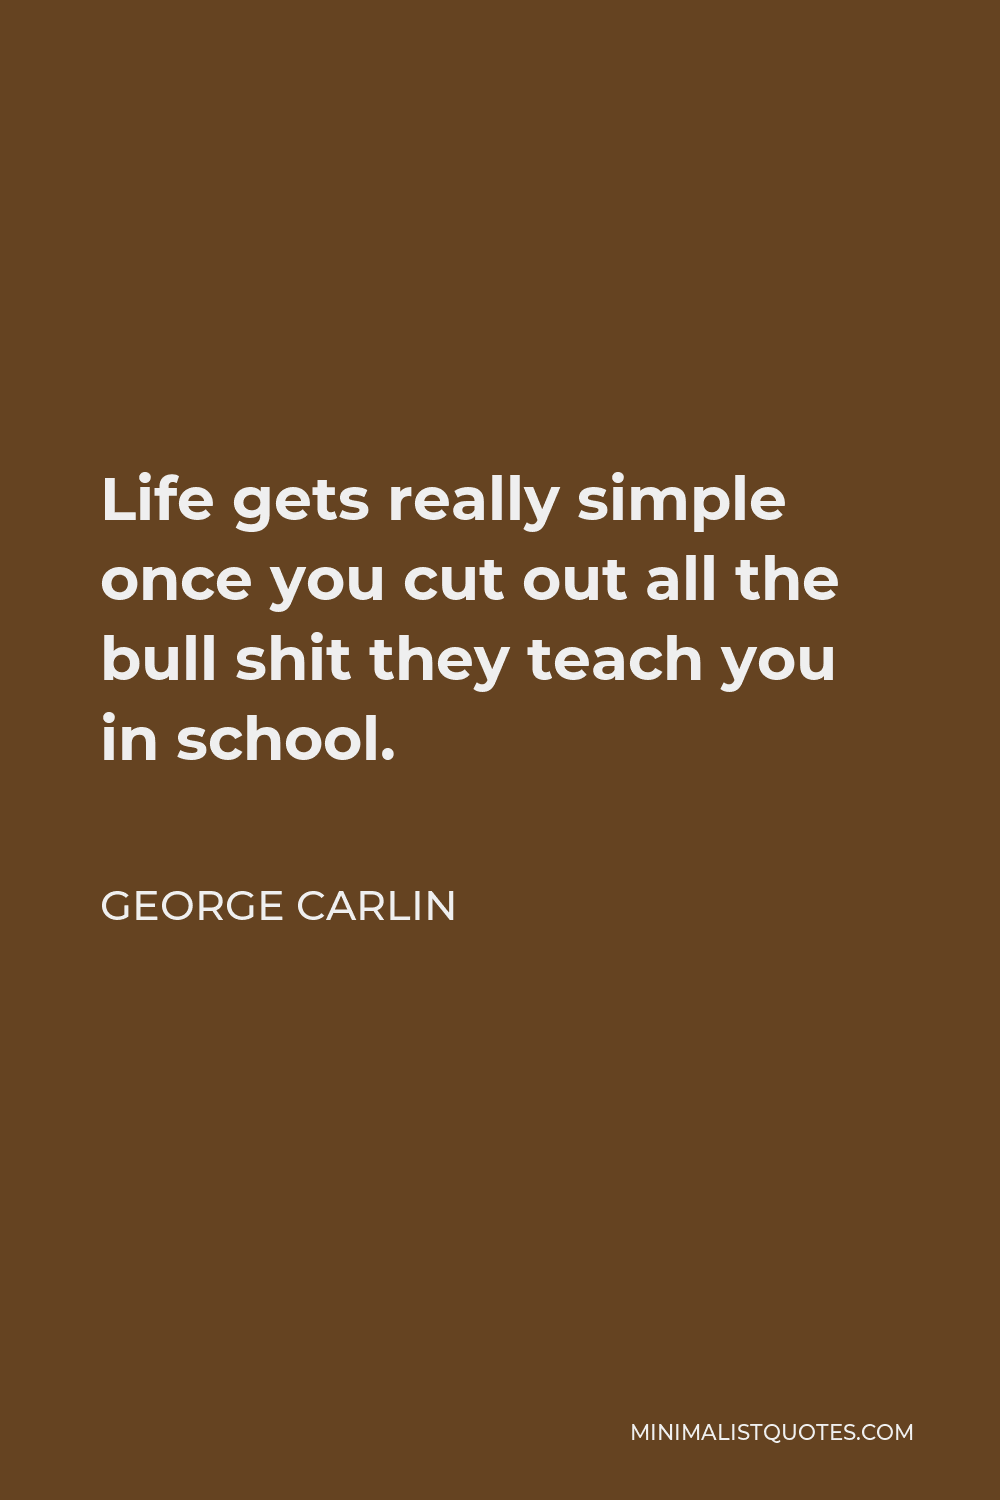 George Carlin Quote - Life gets really simple once you cut out all the bull shit they teach you in school.